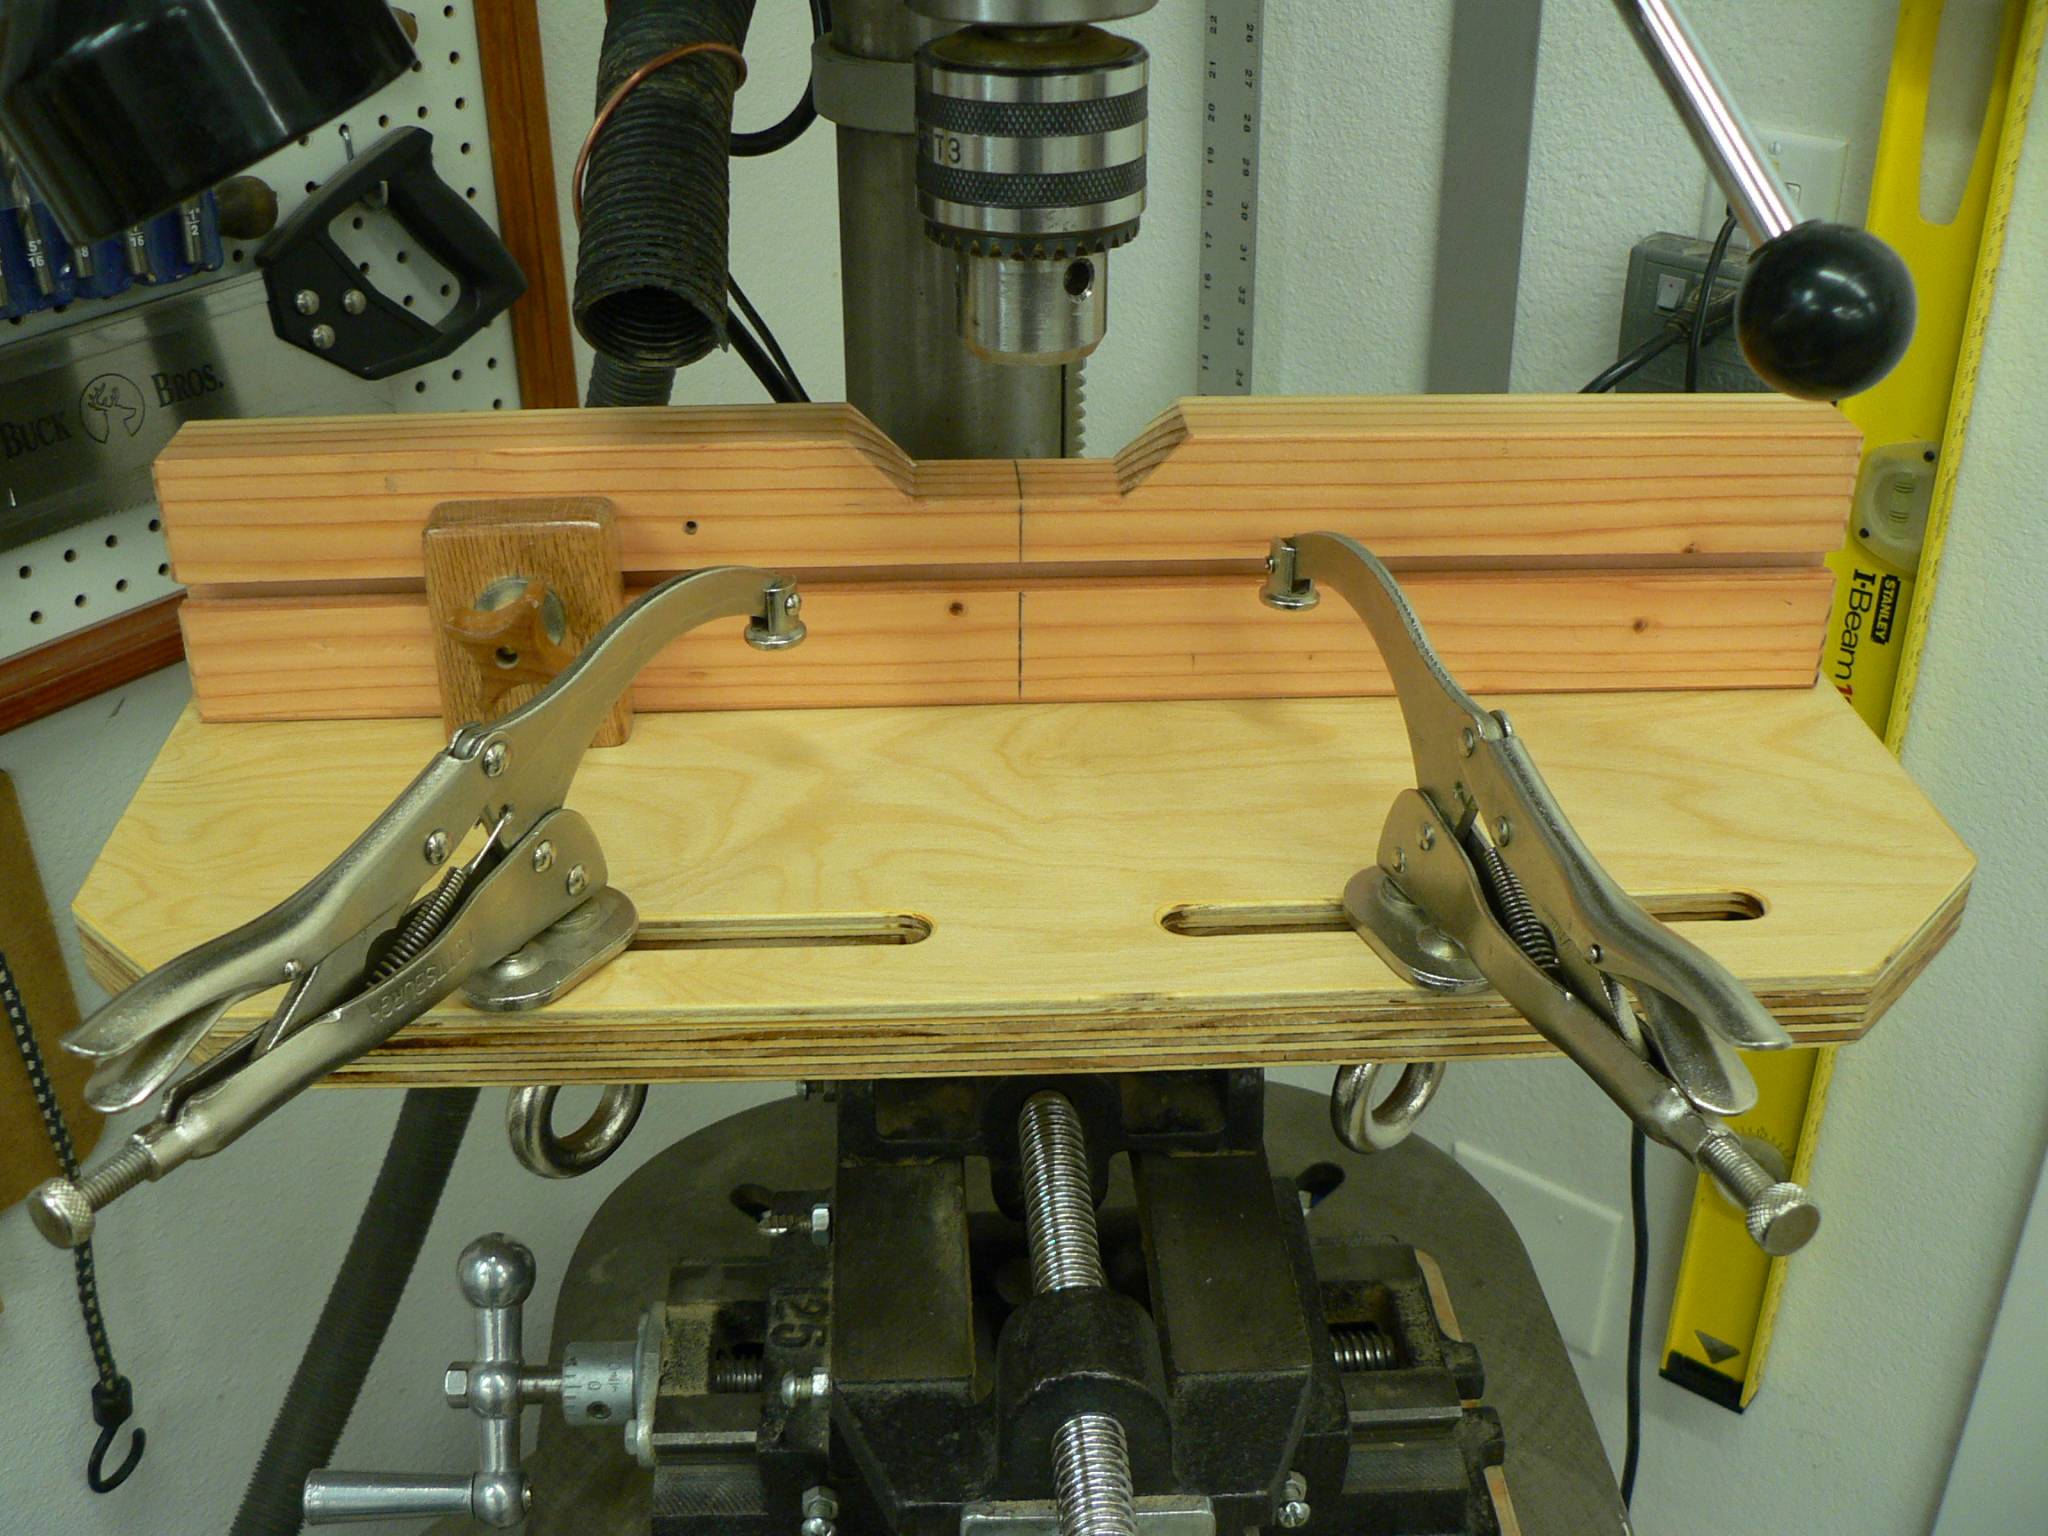 Locking hold-down clamps